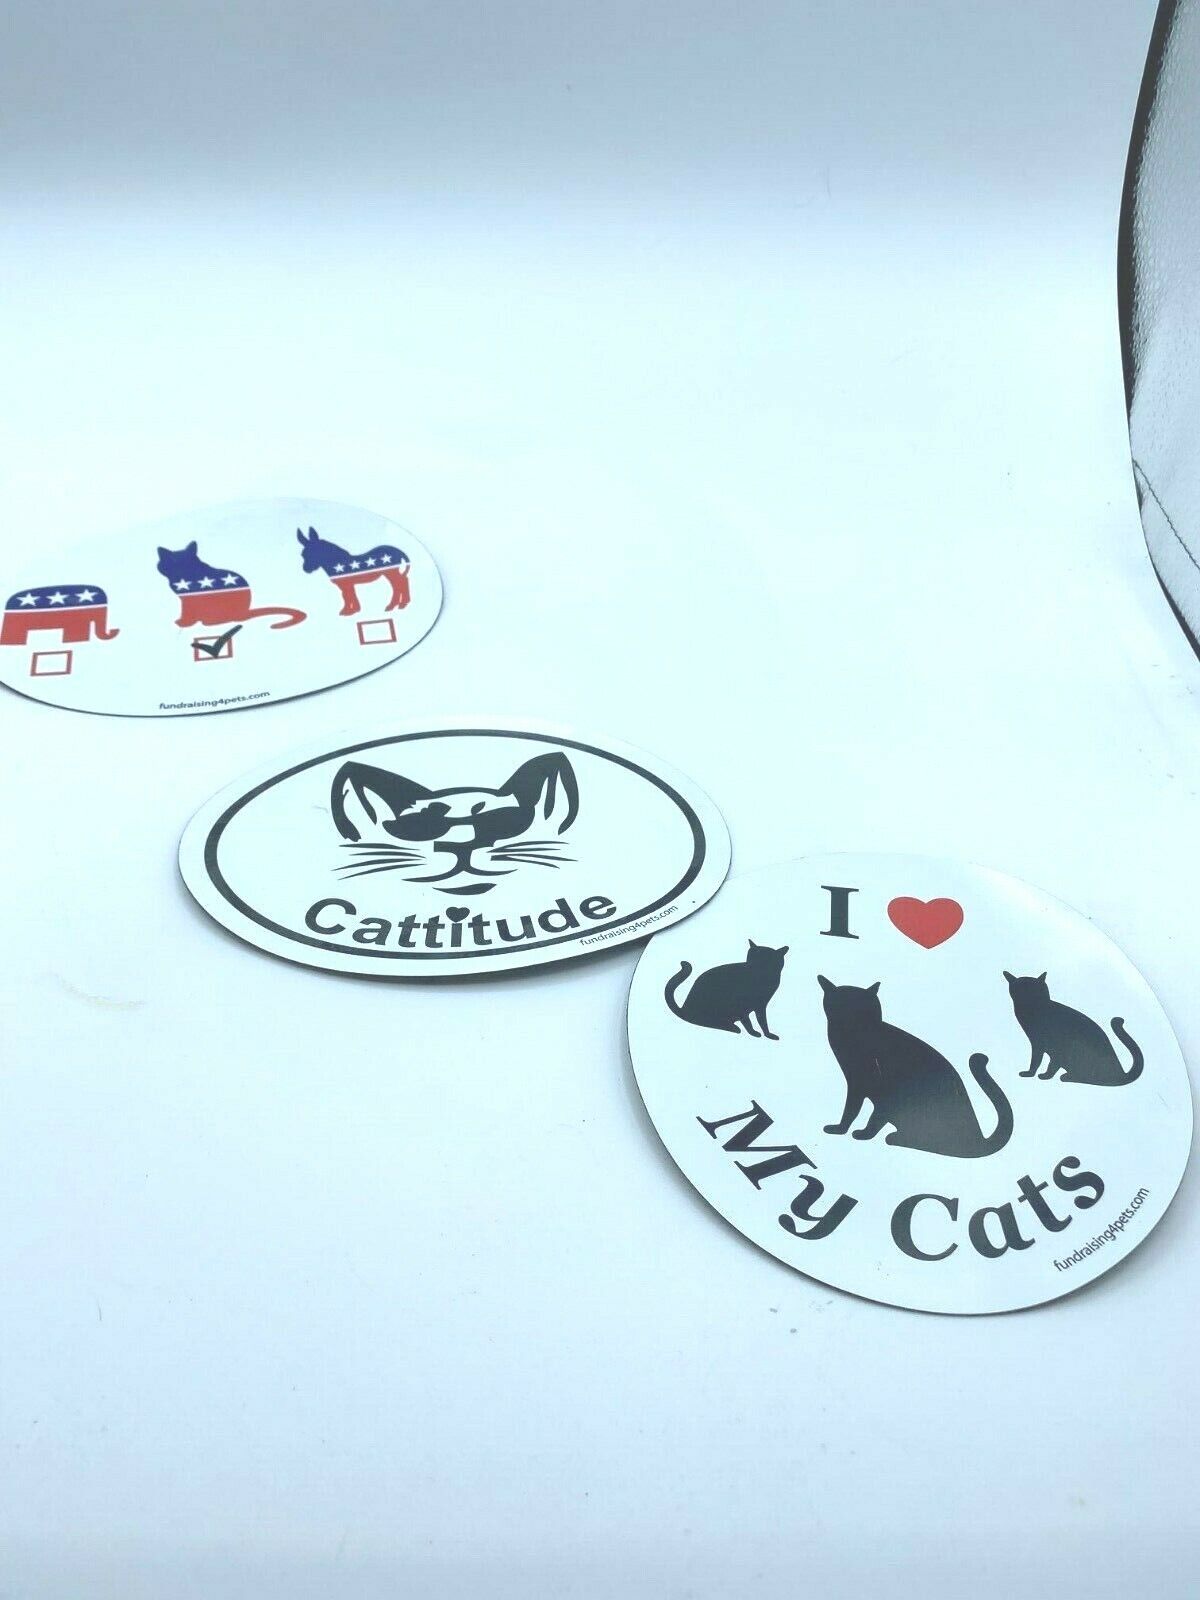 Car Truck Magnet Decal Cat Crazy Cat Lady Set Of 3 Size 5" X 5" Cattitude New